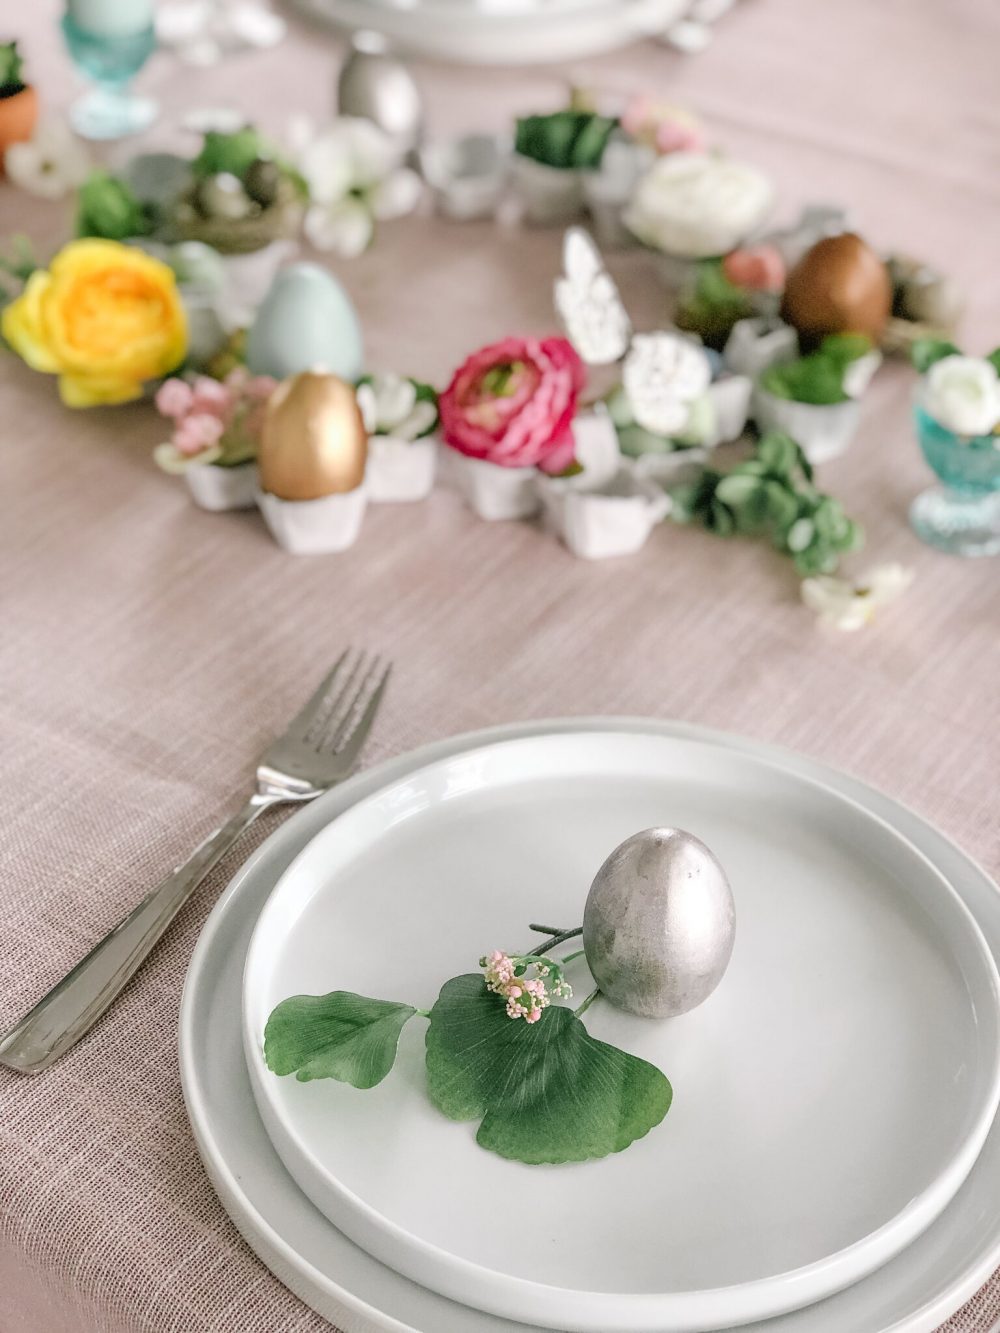 Egg Carton Spring Succulent and Flower Wreath Centerpiece. Don't throw your old egg cartons out, upcycle them into a beautiful Spring wreath centerpiece!